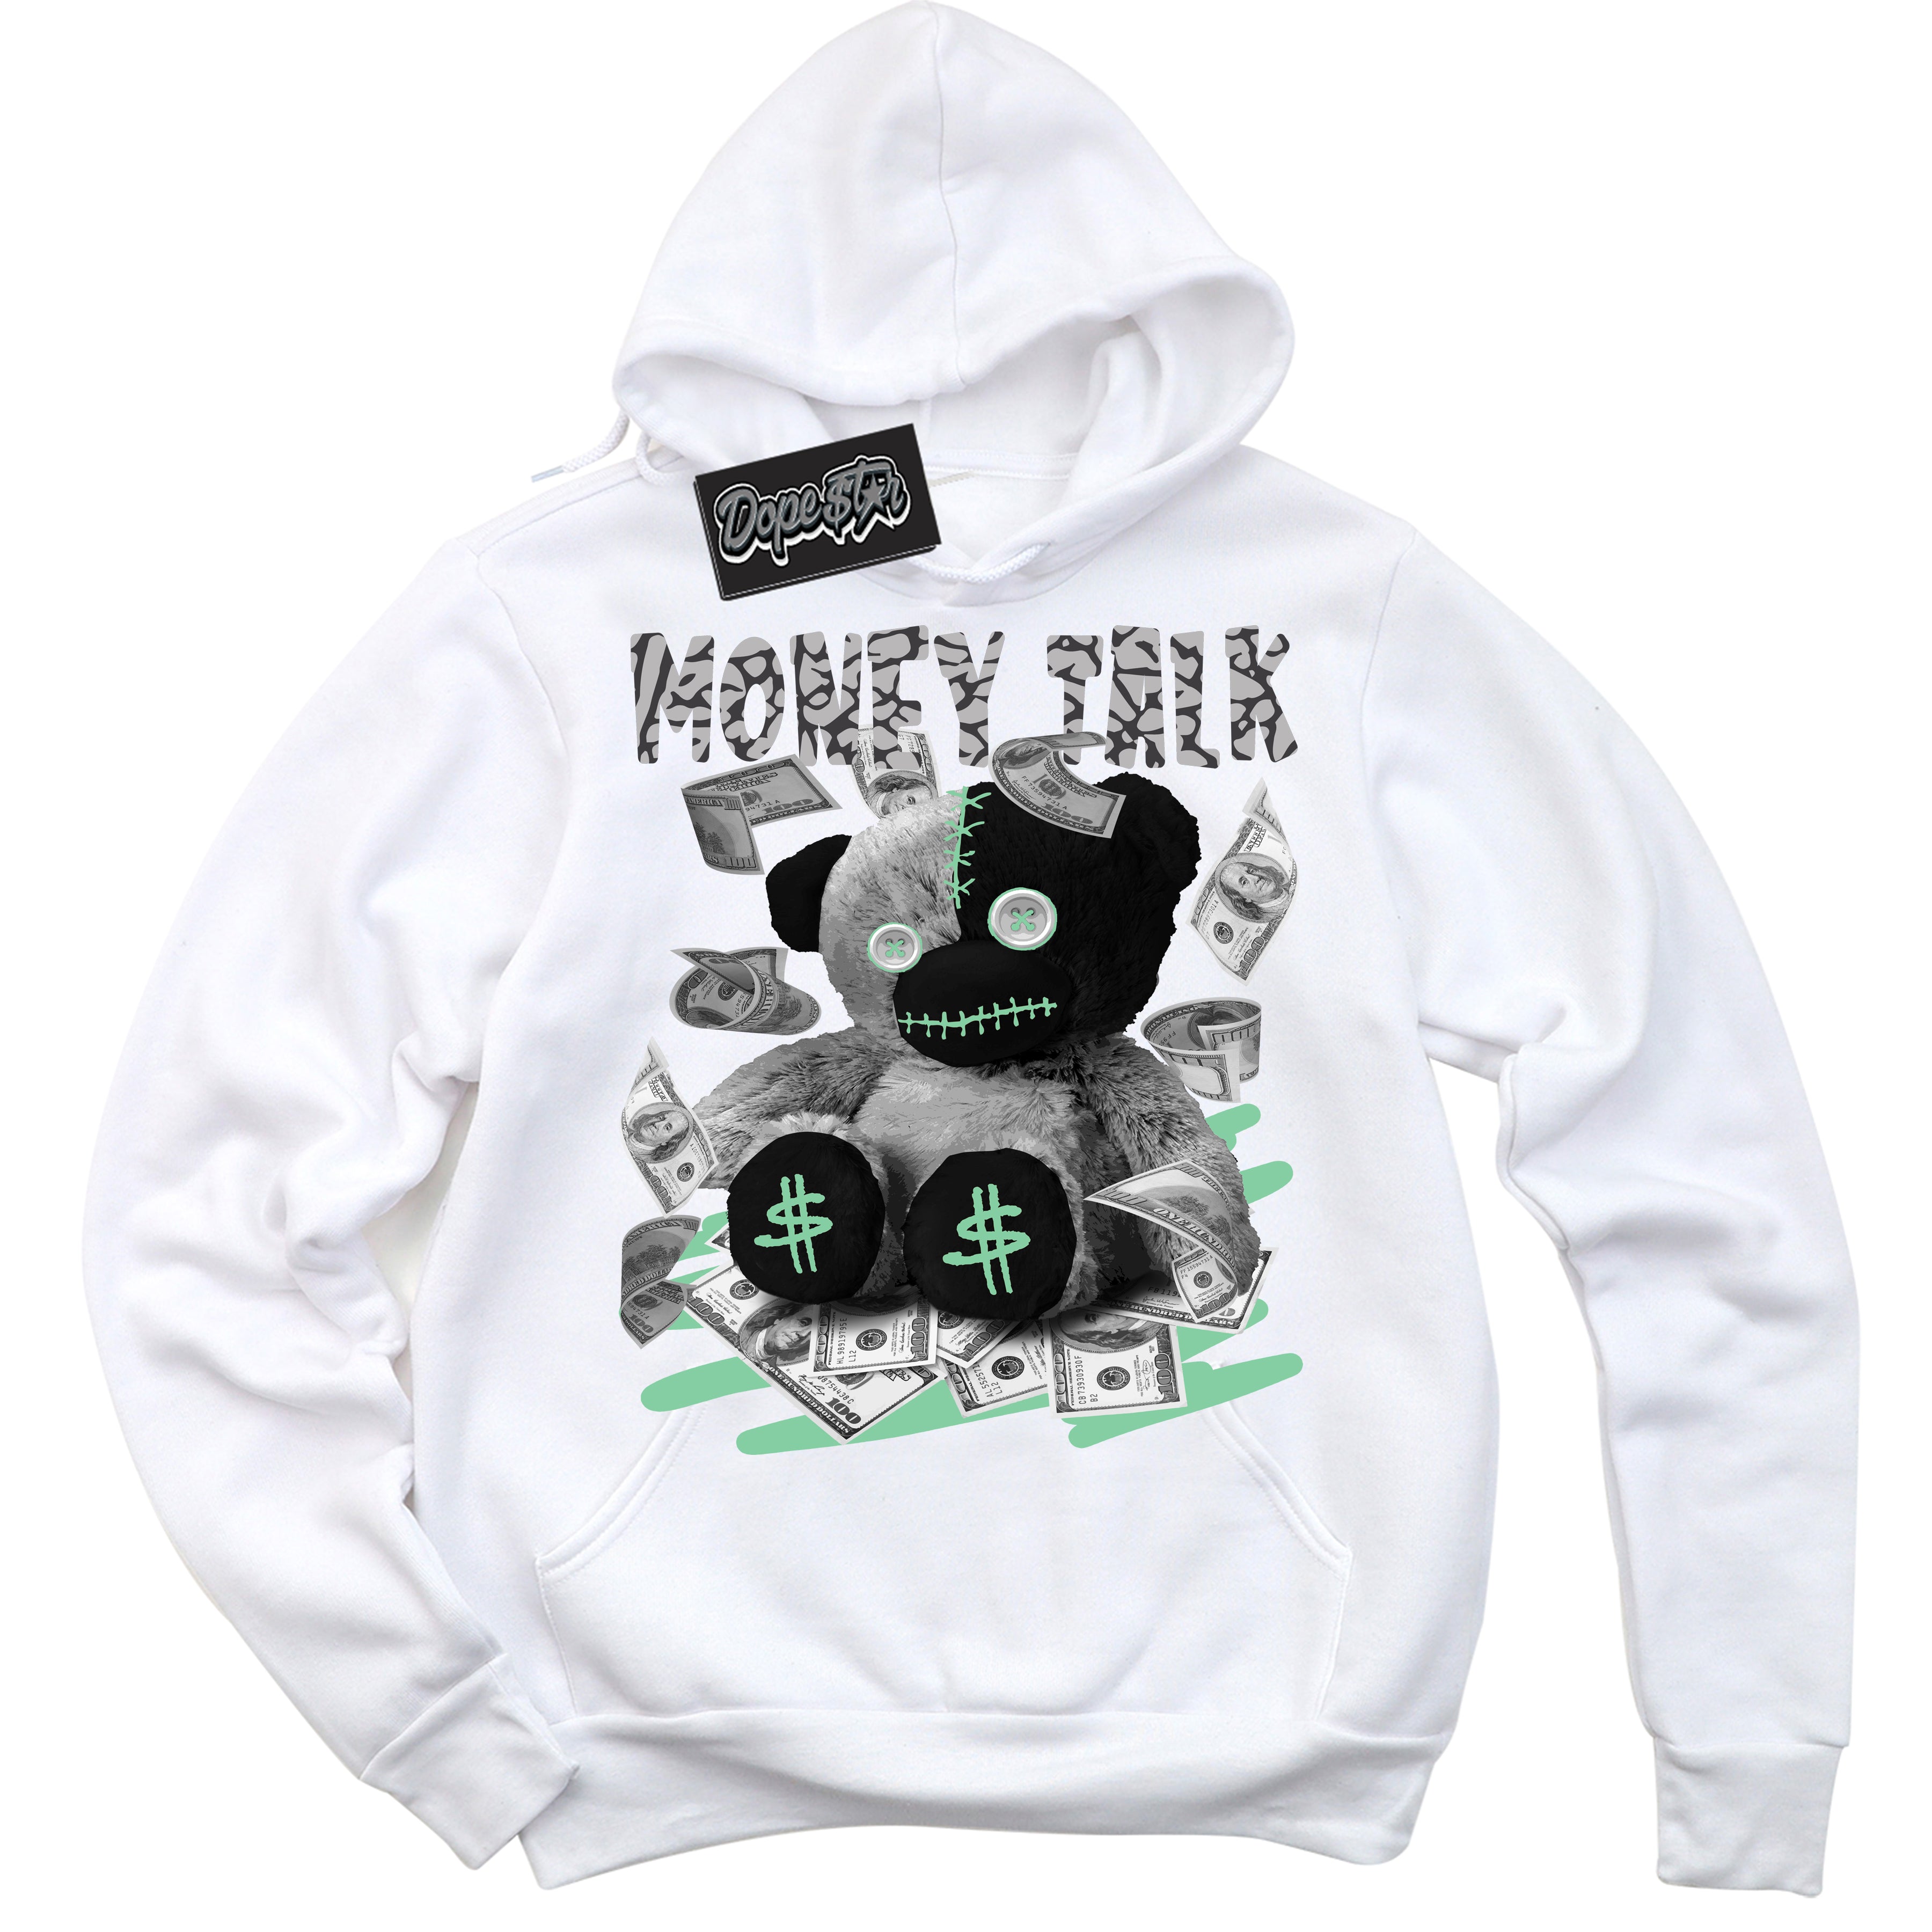 Cool White Graphic DopeStar Hoodie with “ Money Talk Bear “ print, that perfectly matches Green Glow 3s sneakers